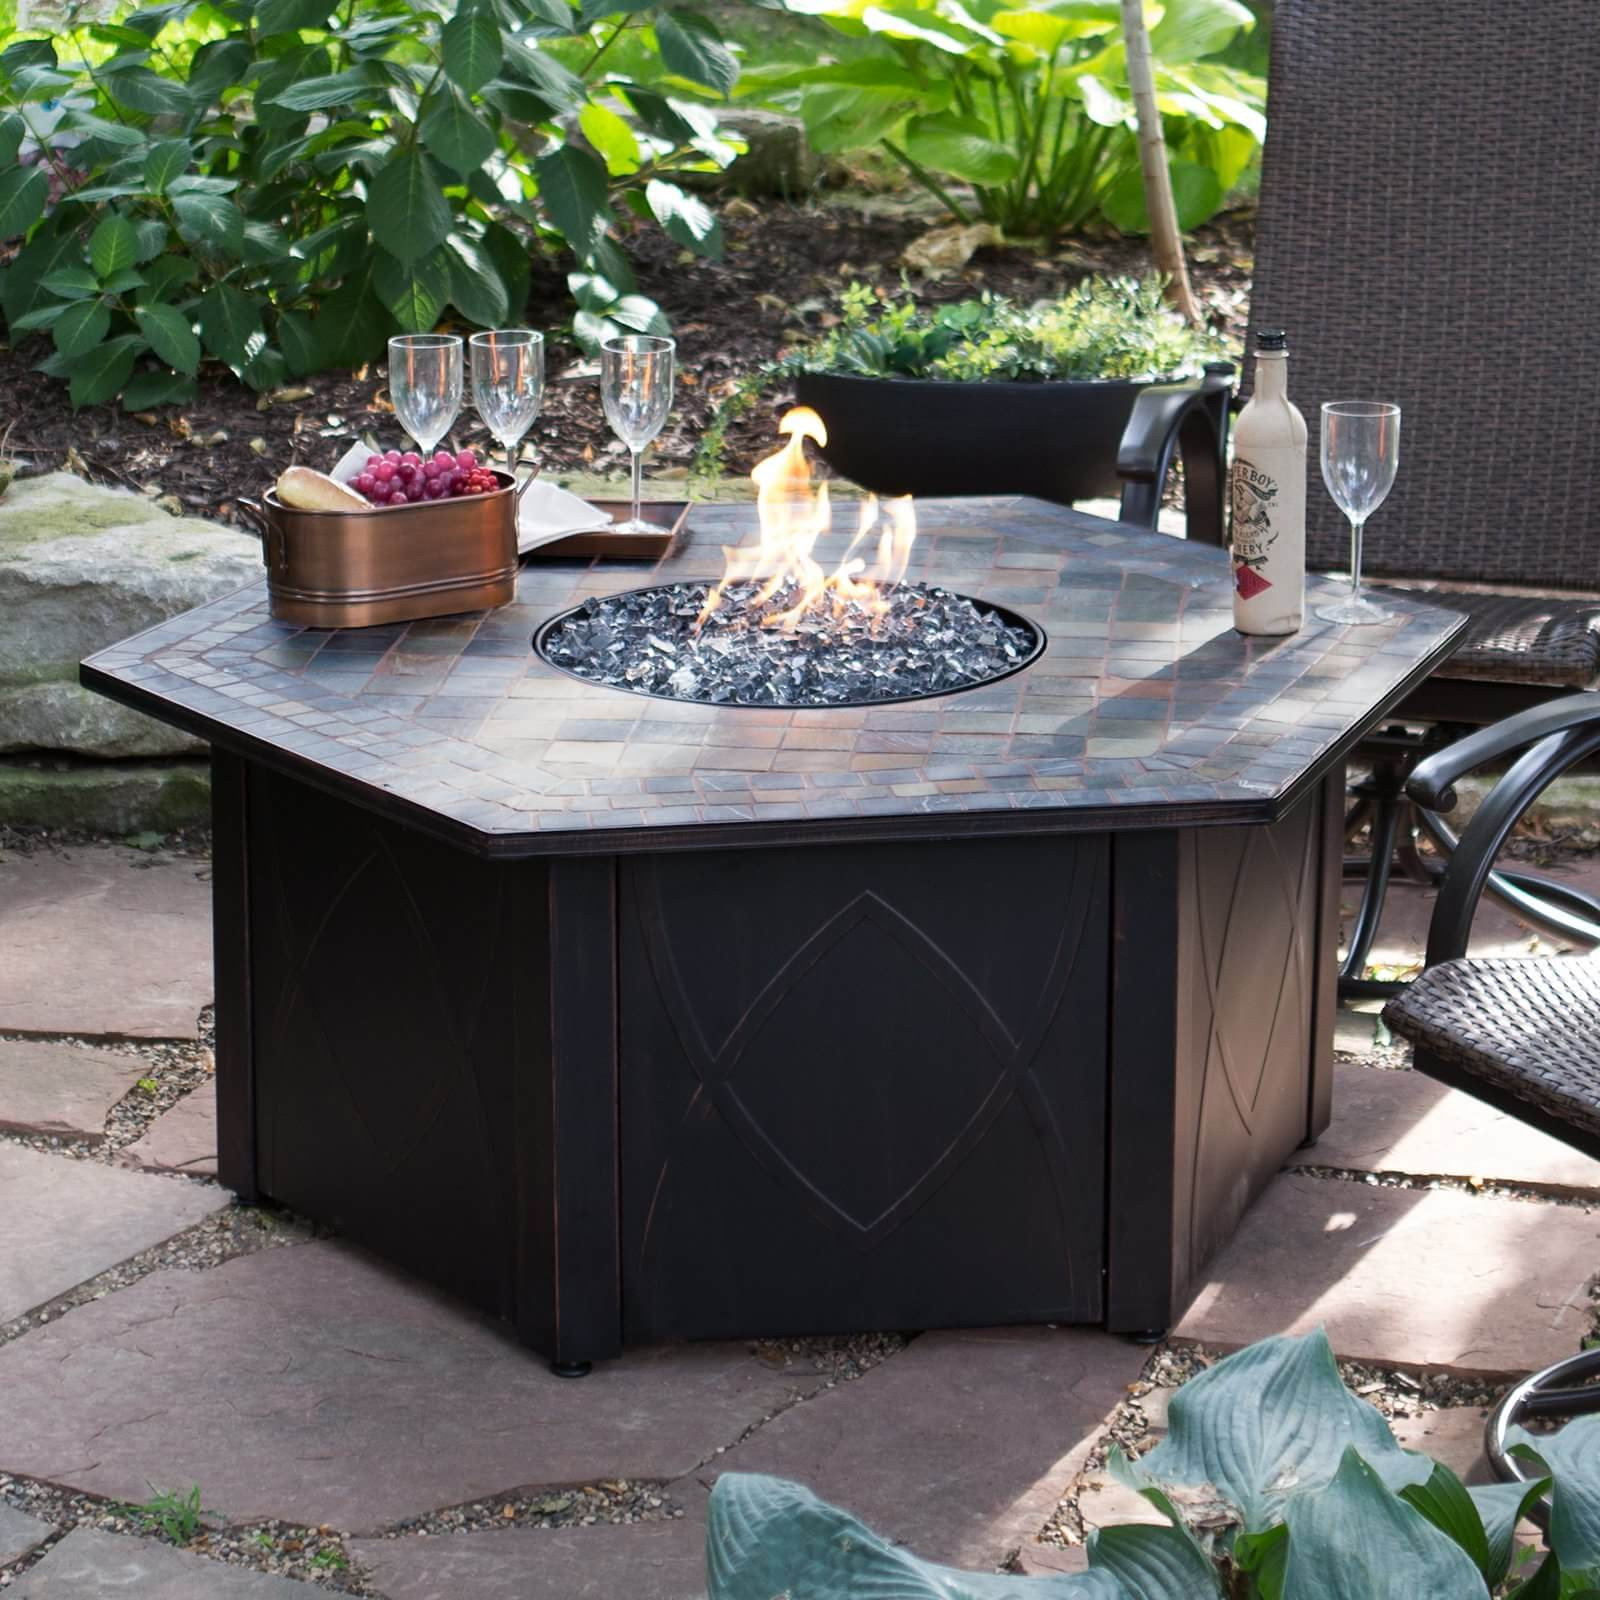 Outdoor Fire Pit Propane
 Top 15 Types of Propane Patio Fire Pits with Table Buying